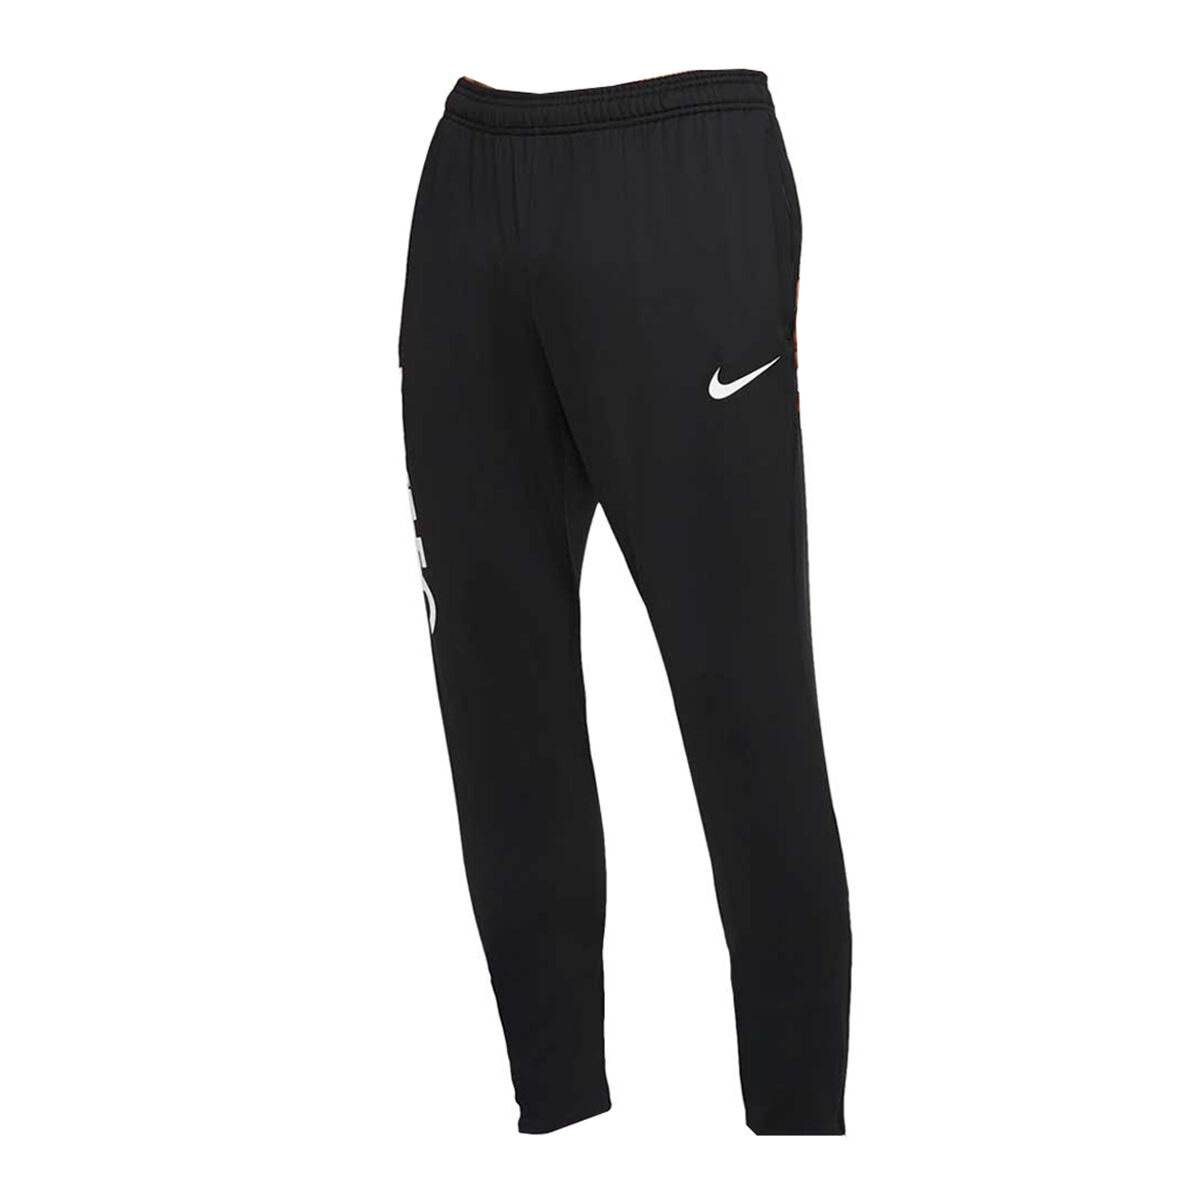 Nike Pro Combat Hyperstrong Football Pants With Knee Pads Reviews 2022  Football  pants Mens workout clothes Nike pros